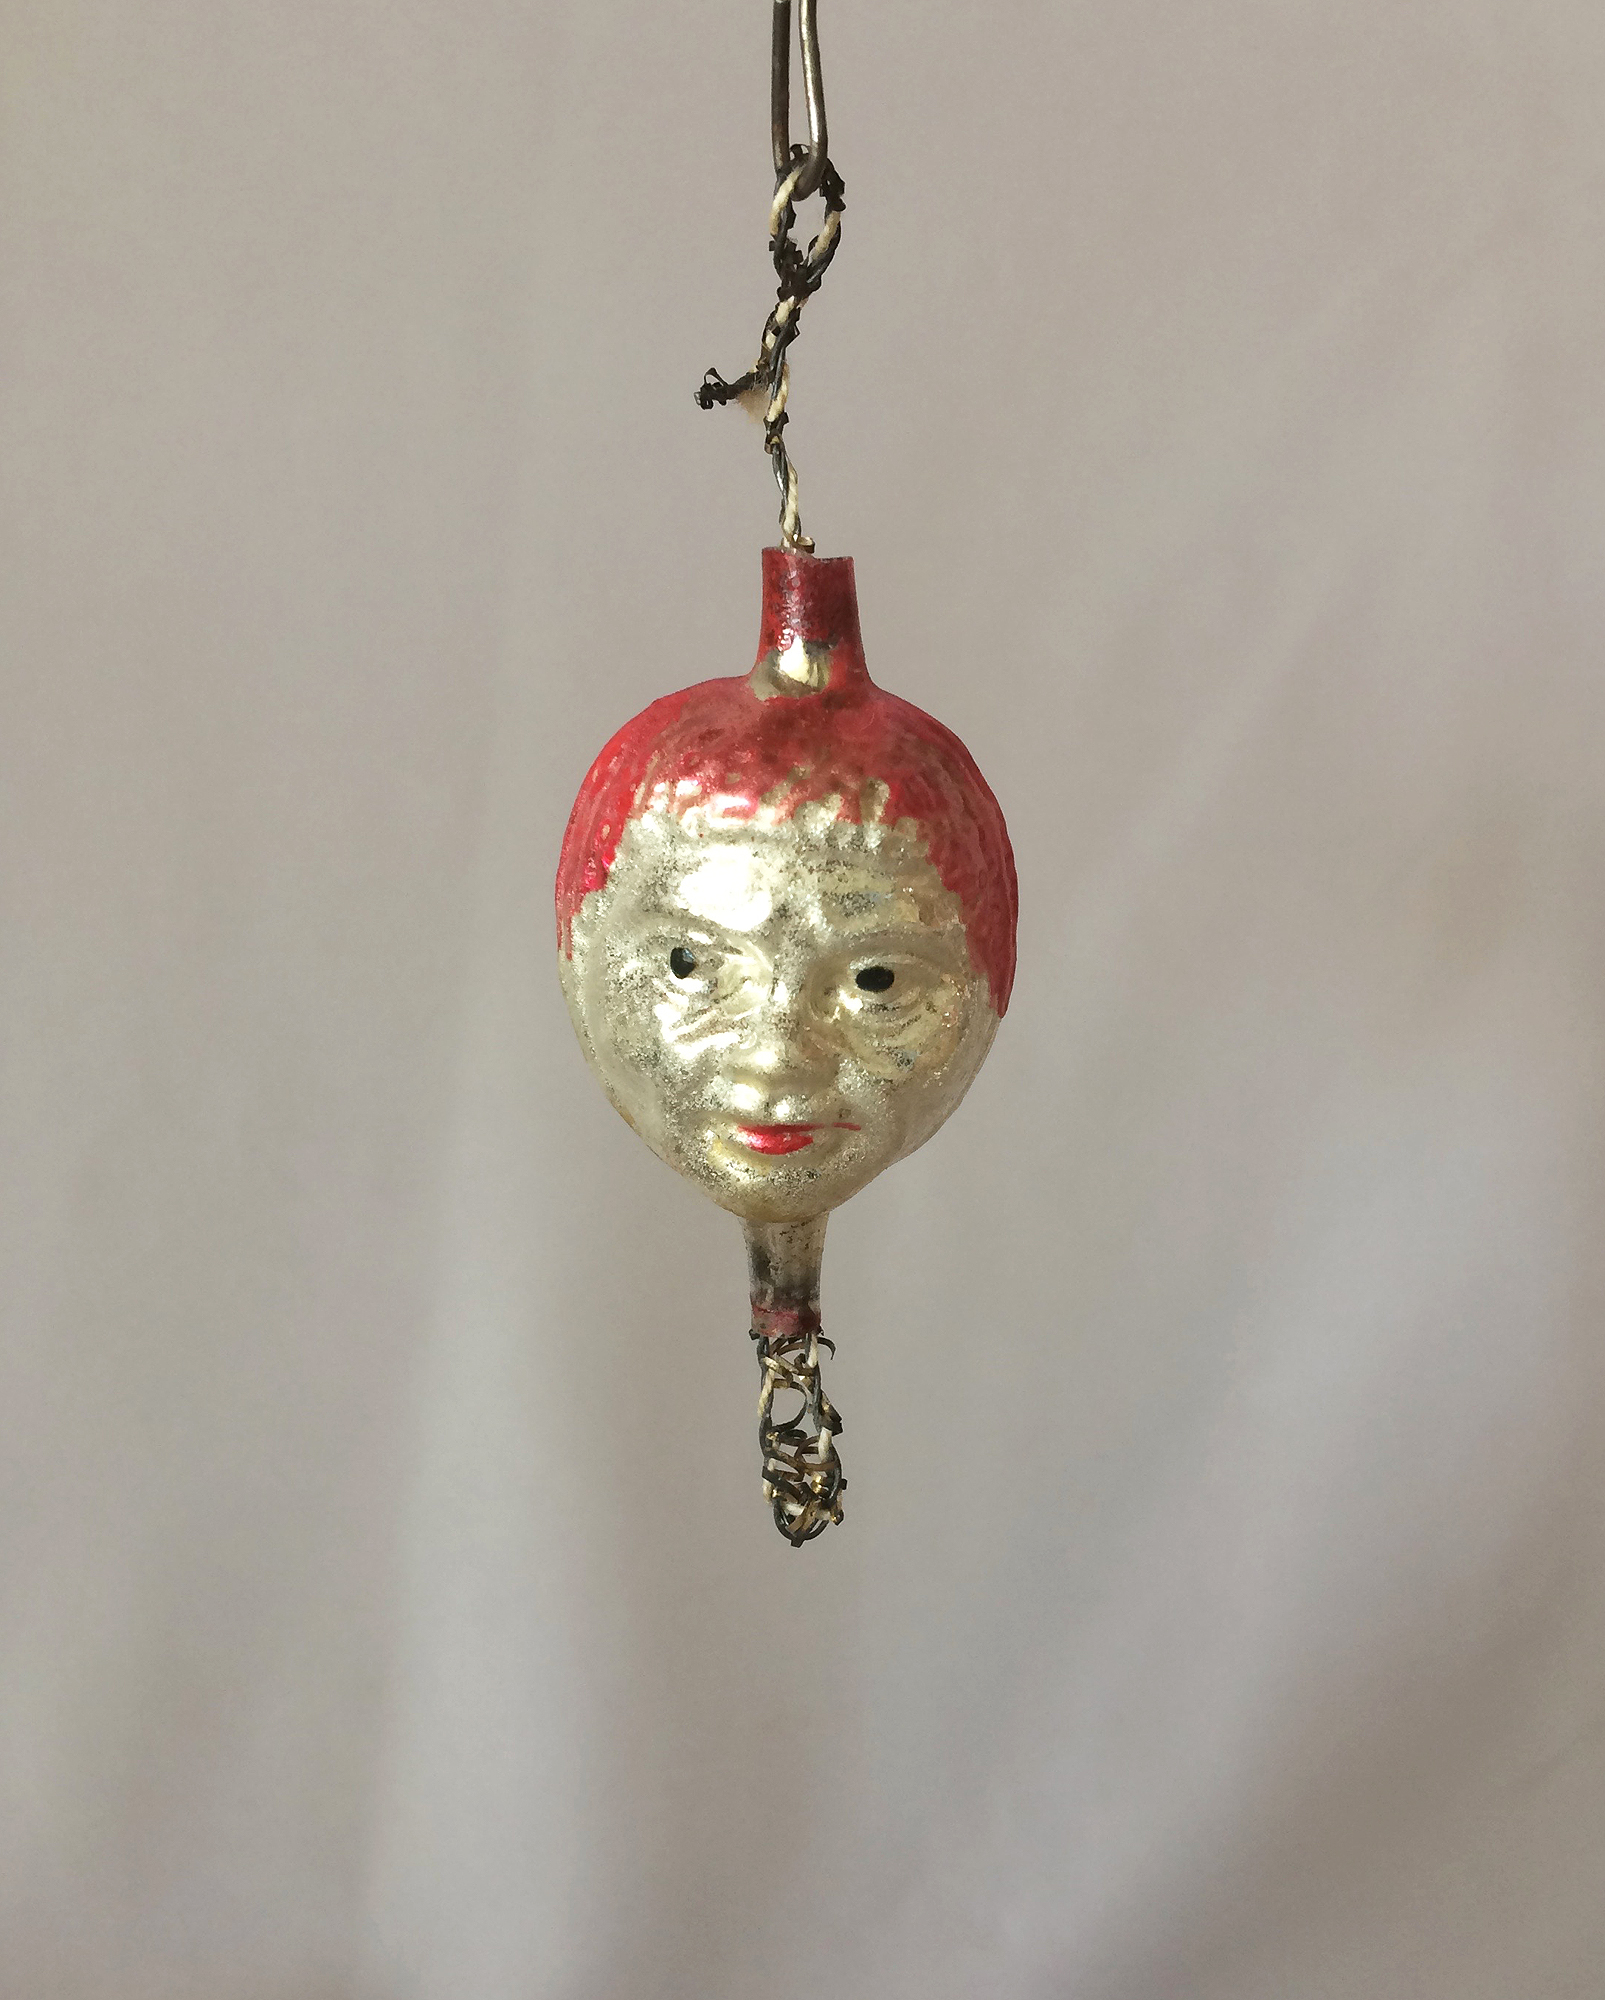 Exploring Antique Christmas Ornaments: Values and Charm | LoveToKnow